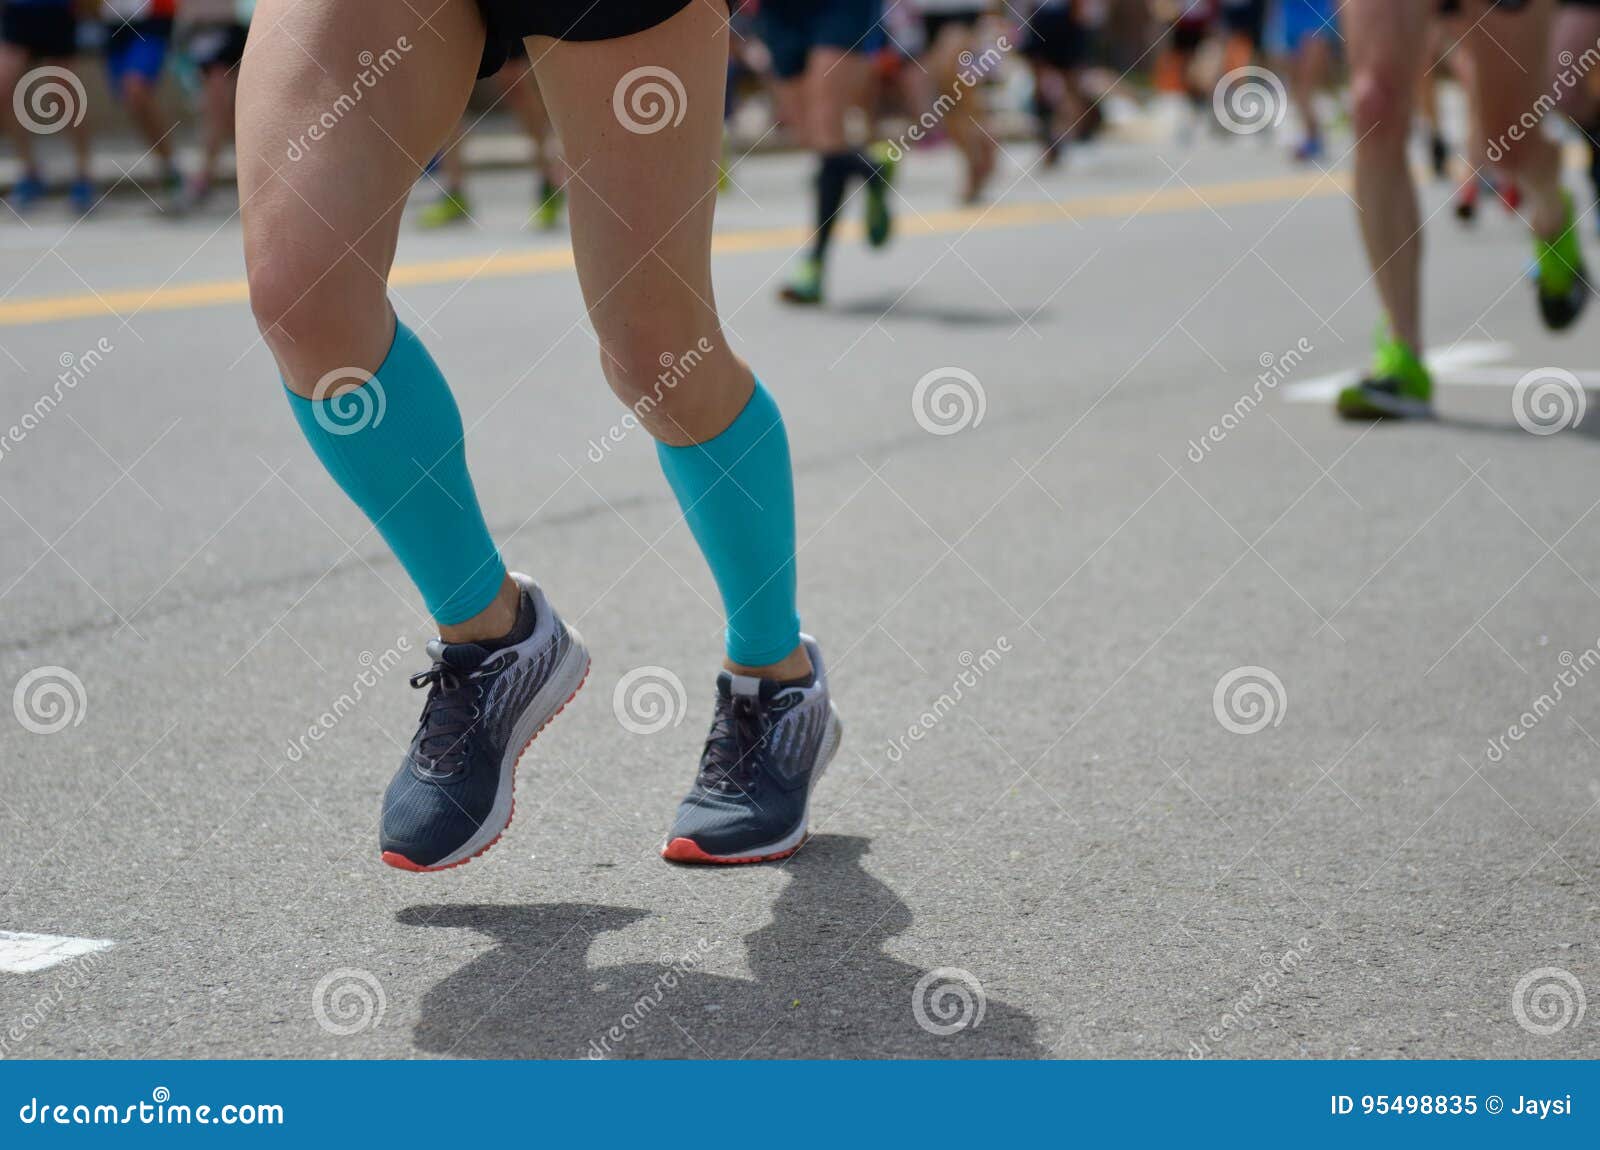 Marathon Running Race, Many Runners Feet on Road, Sport, Fitness and ...